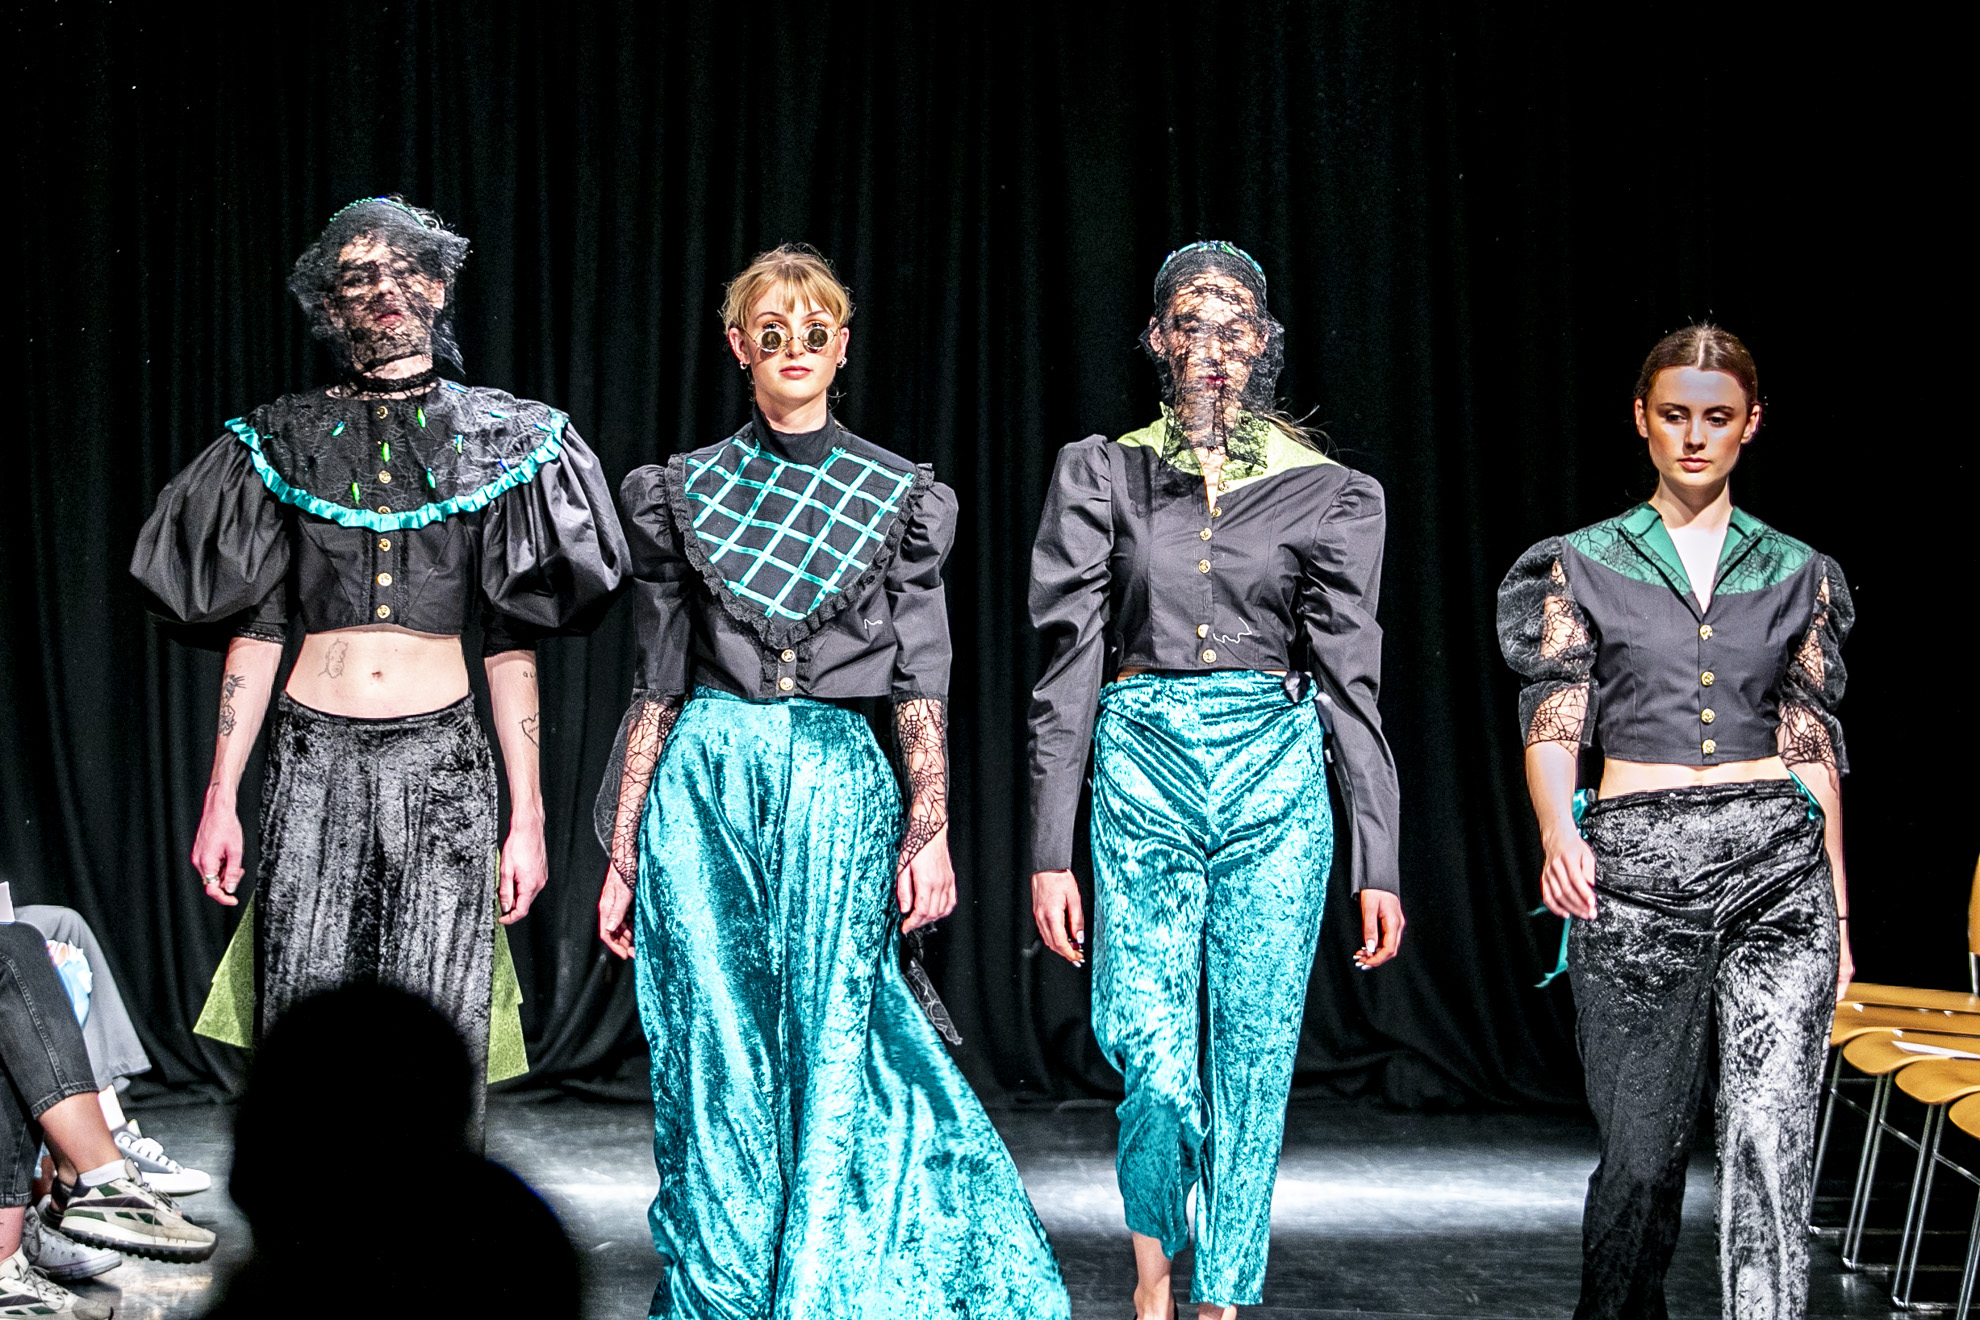 four fashion students in costume walking down the runway